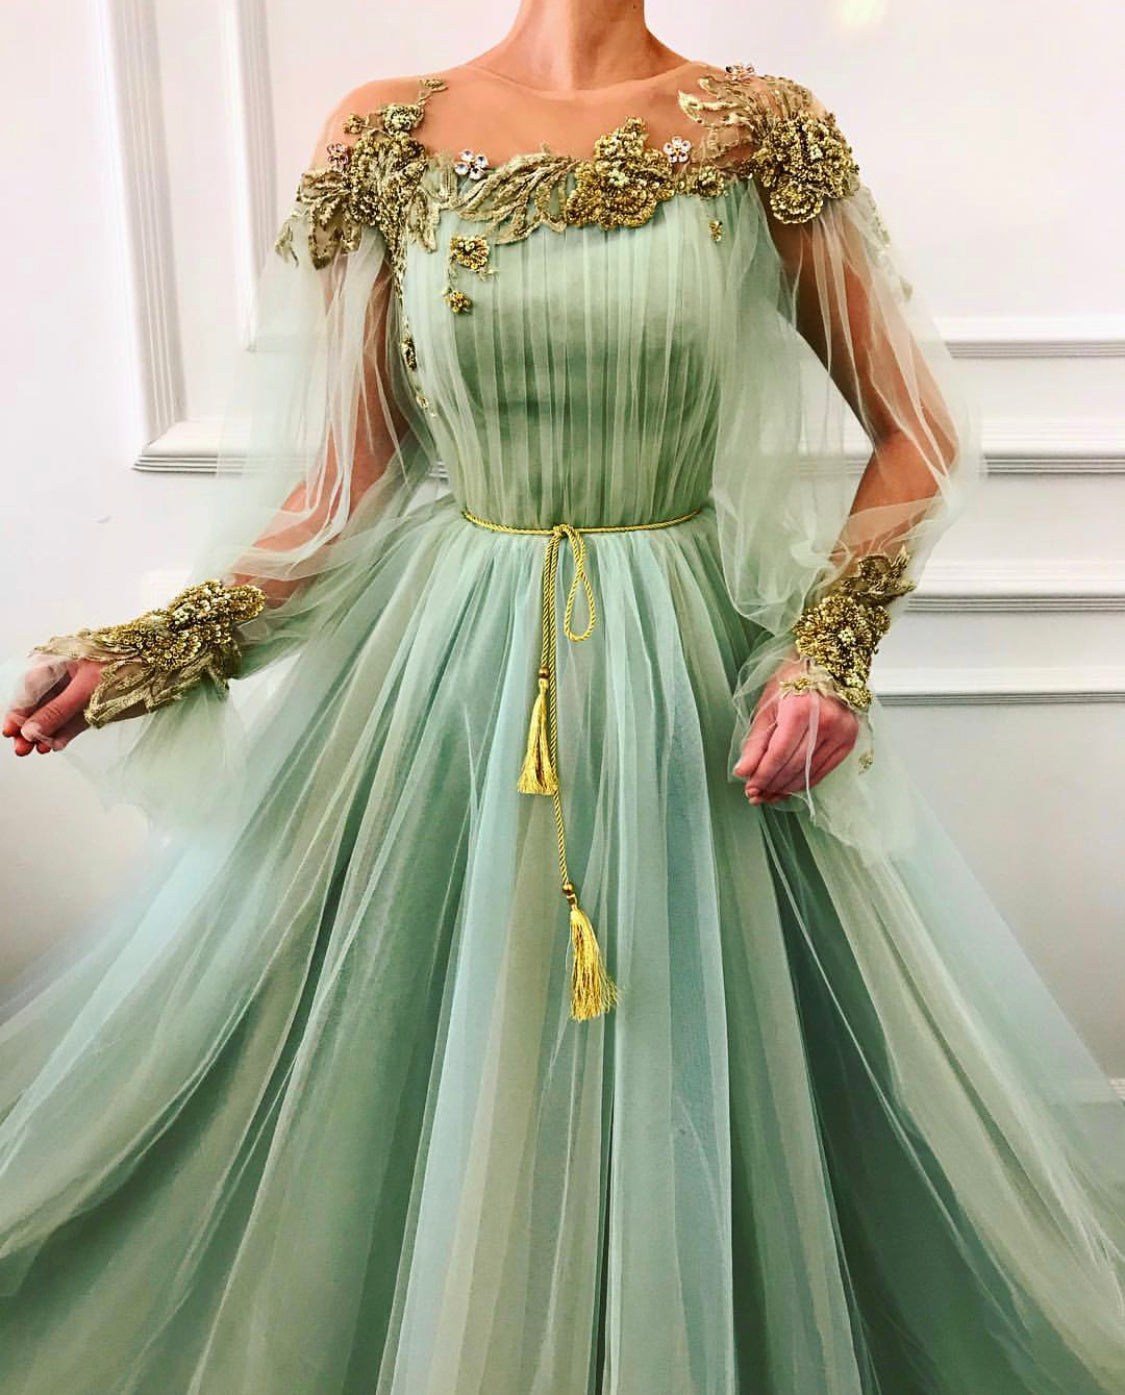 Green A-Line dress with long sleeves and embroidery